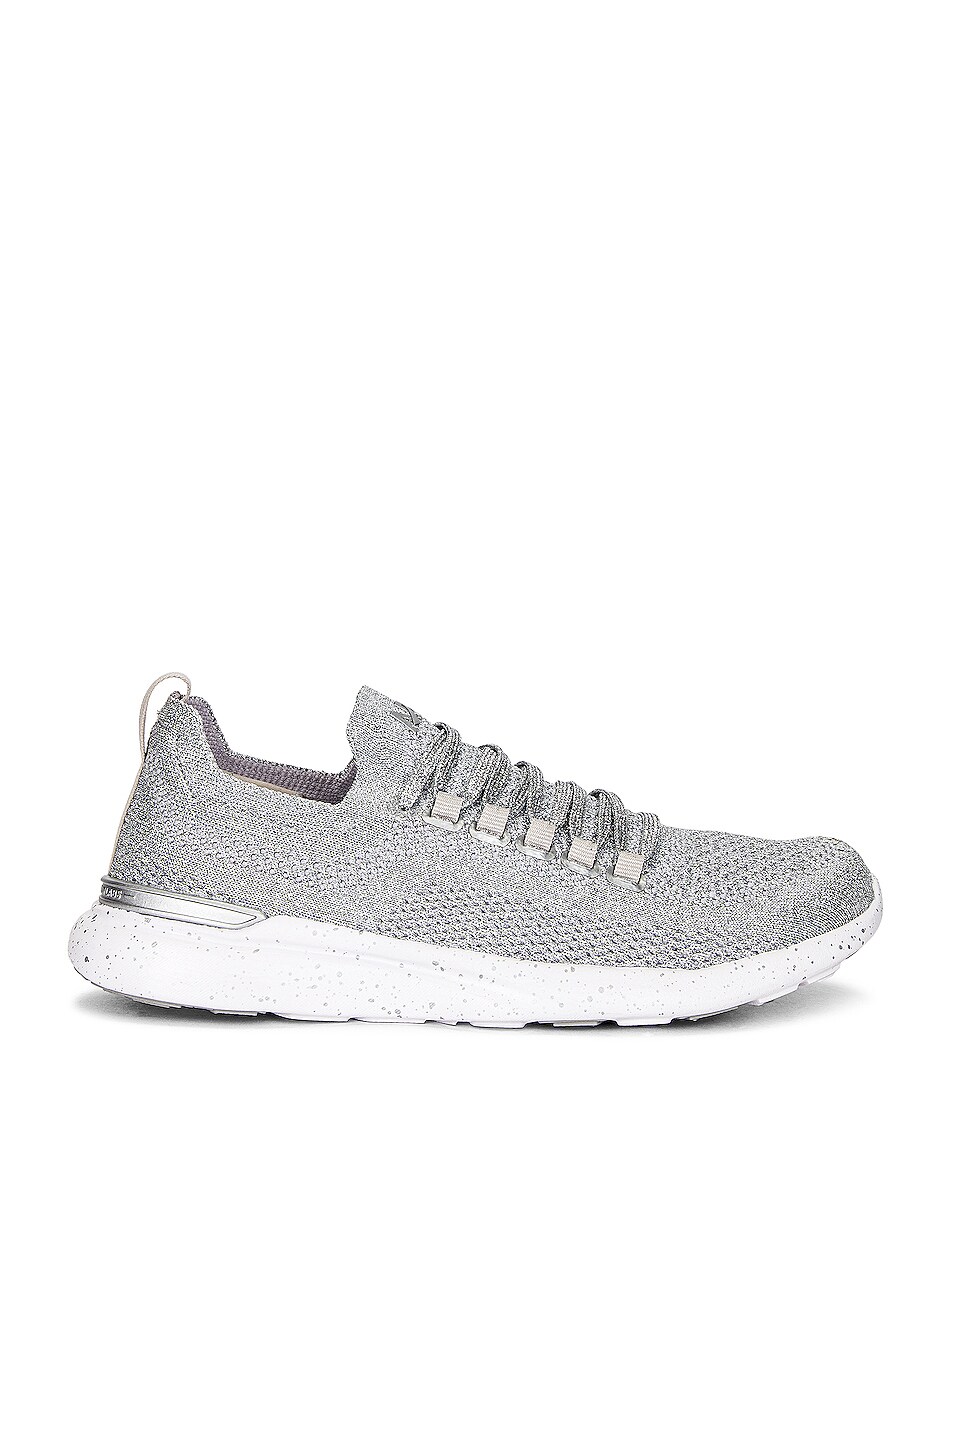 Image 1 of APL: Athletic Propulsion Labs TechLoom Breeze Sneaker in Metallic Silver, White, & Speckle